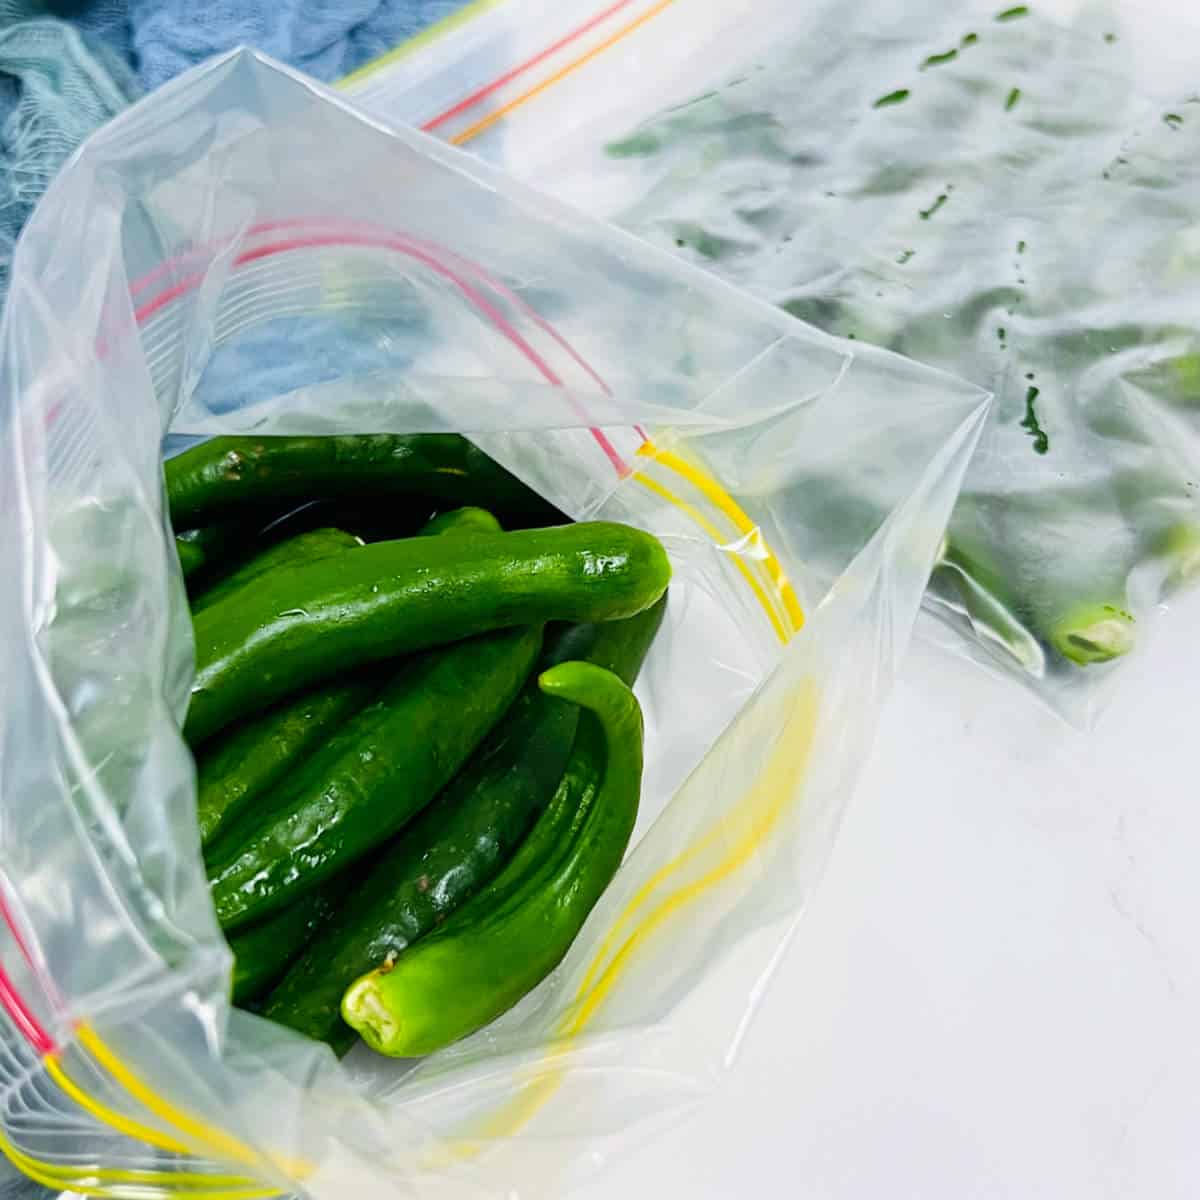 Step showing ow to store green chili peppers in a ziplock bag.